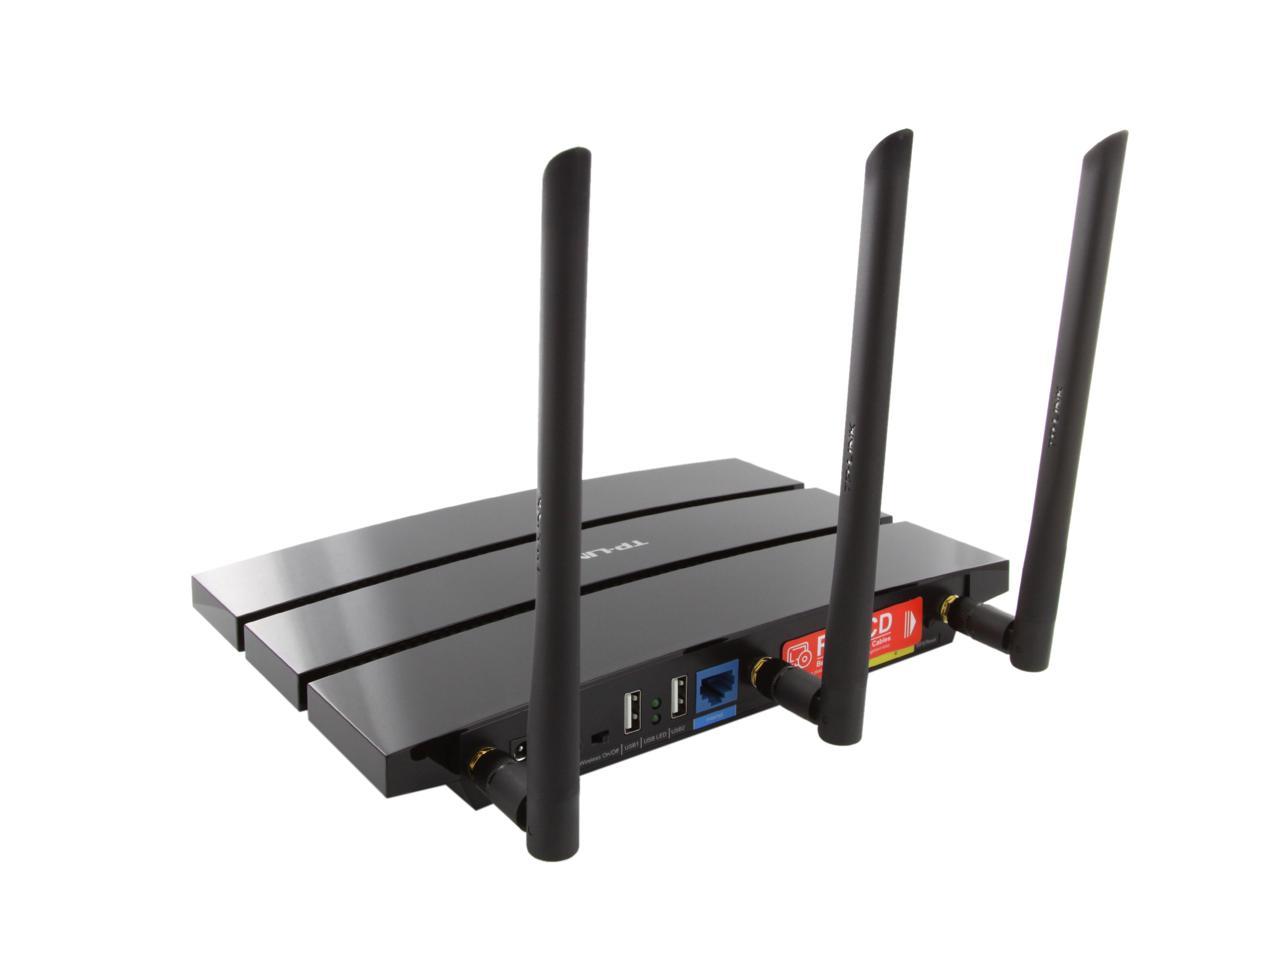 TP-LINK Archer C7 Wireless AC1750 Dual Band Gigabit Router, 450 Mbps on 2.4 GHz + Mbps on 5 GHz, 1 USB Port, IPv6, Guest Network - Newegg.com